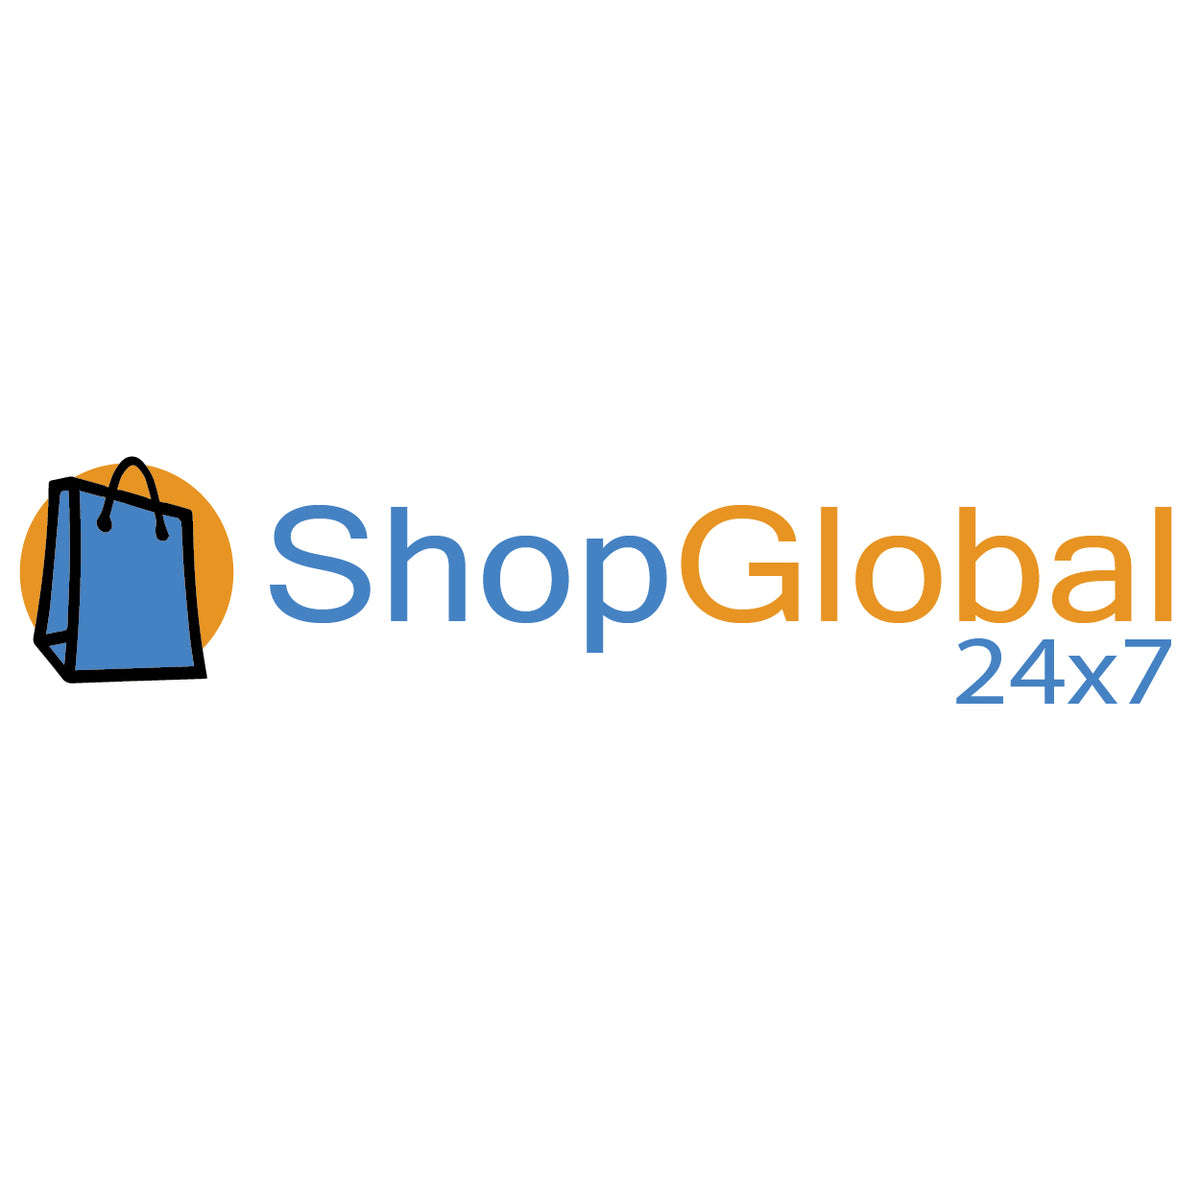 ShopGlobal24x7 deals and offers